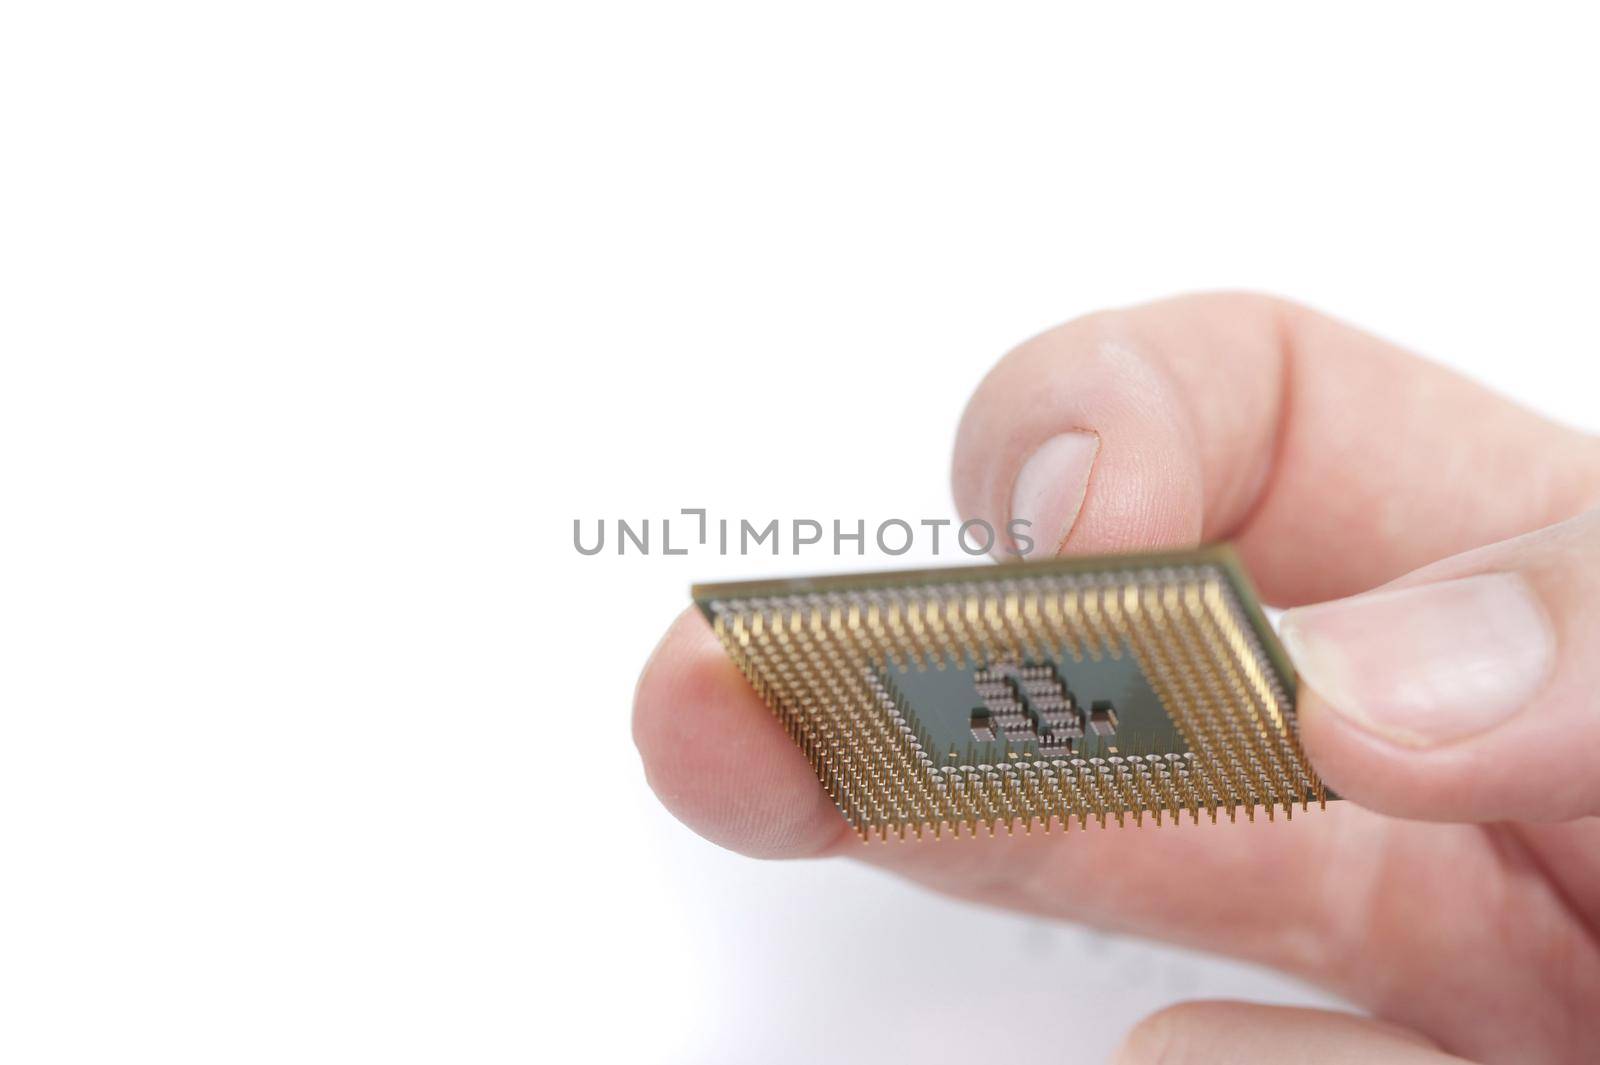 Man holding computer CPU with his fingers, close-up image on white background with copy space